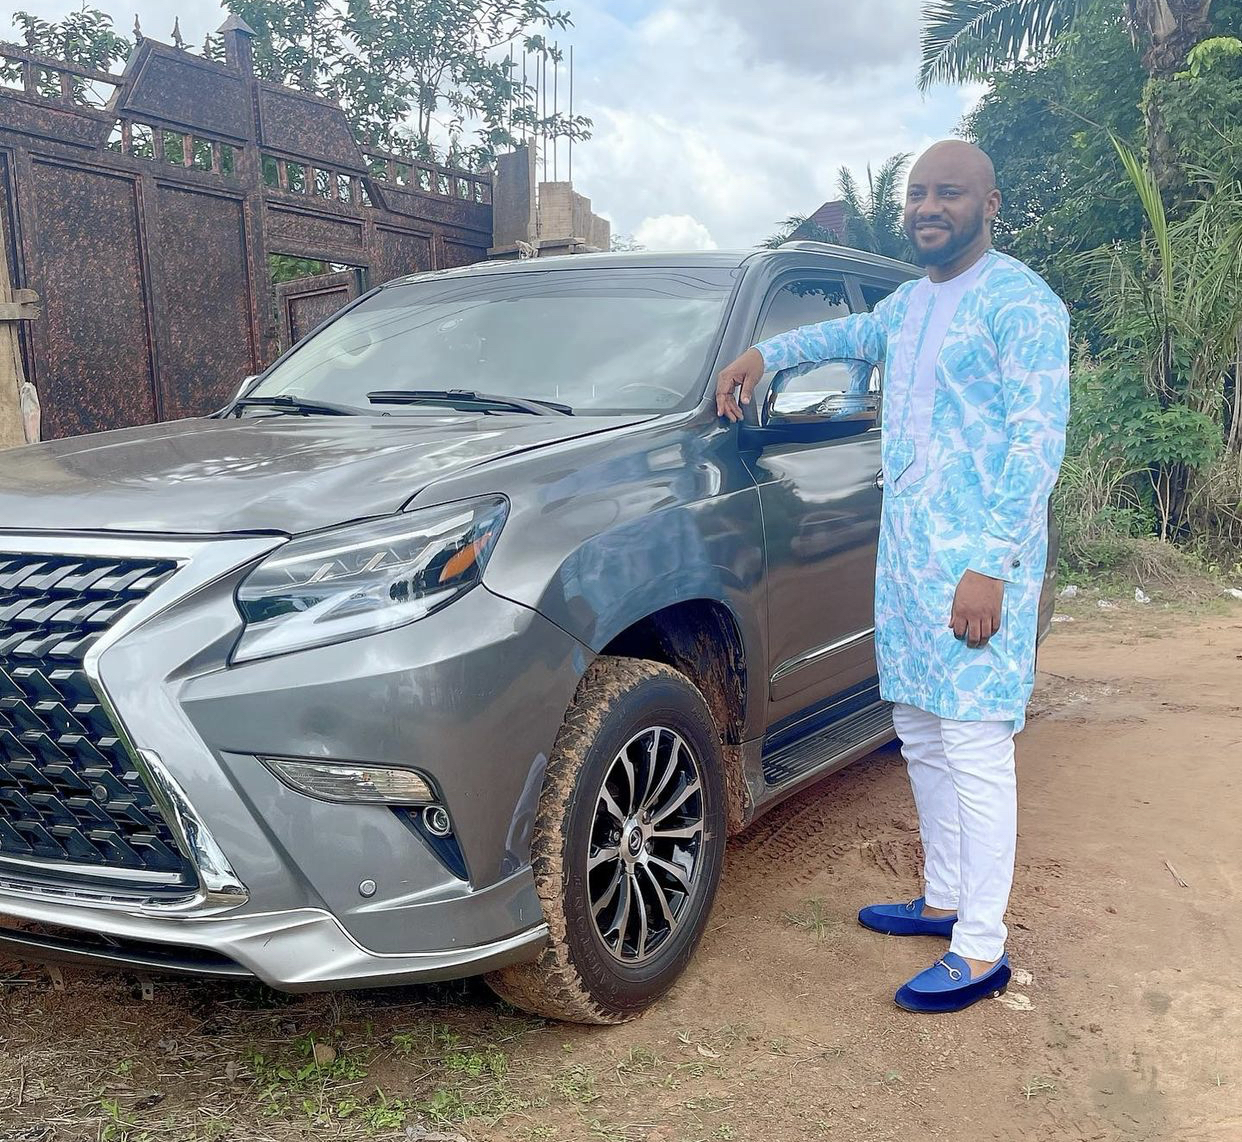 Actor Yul Edochie buys Lexus SUV after 16 years of hustling - P.M. News